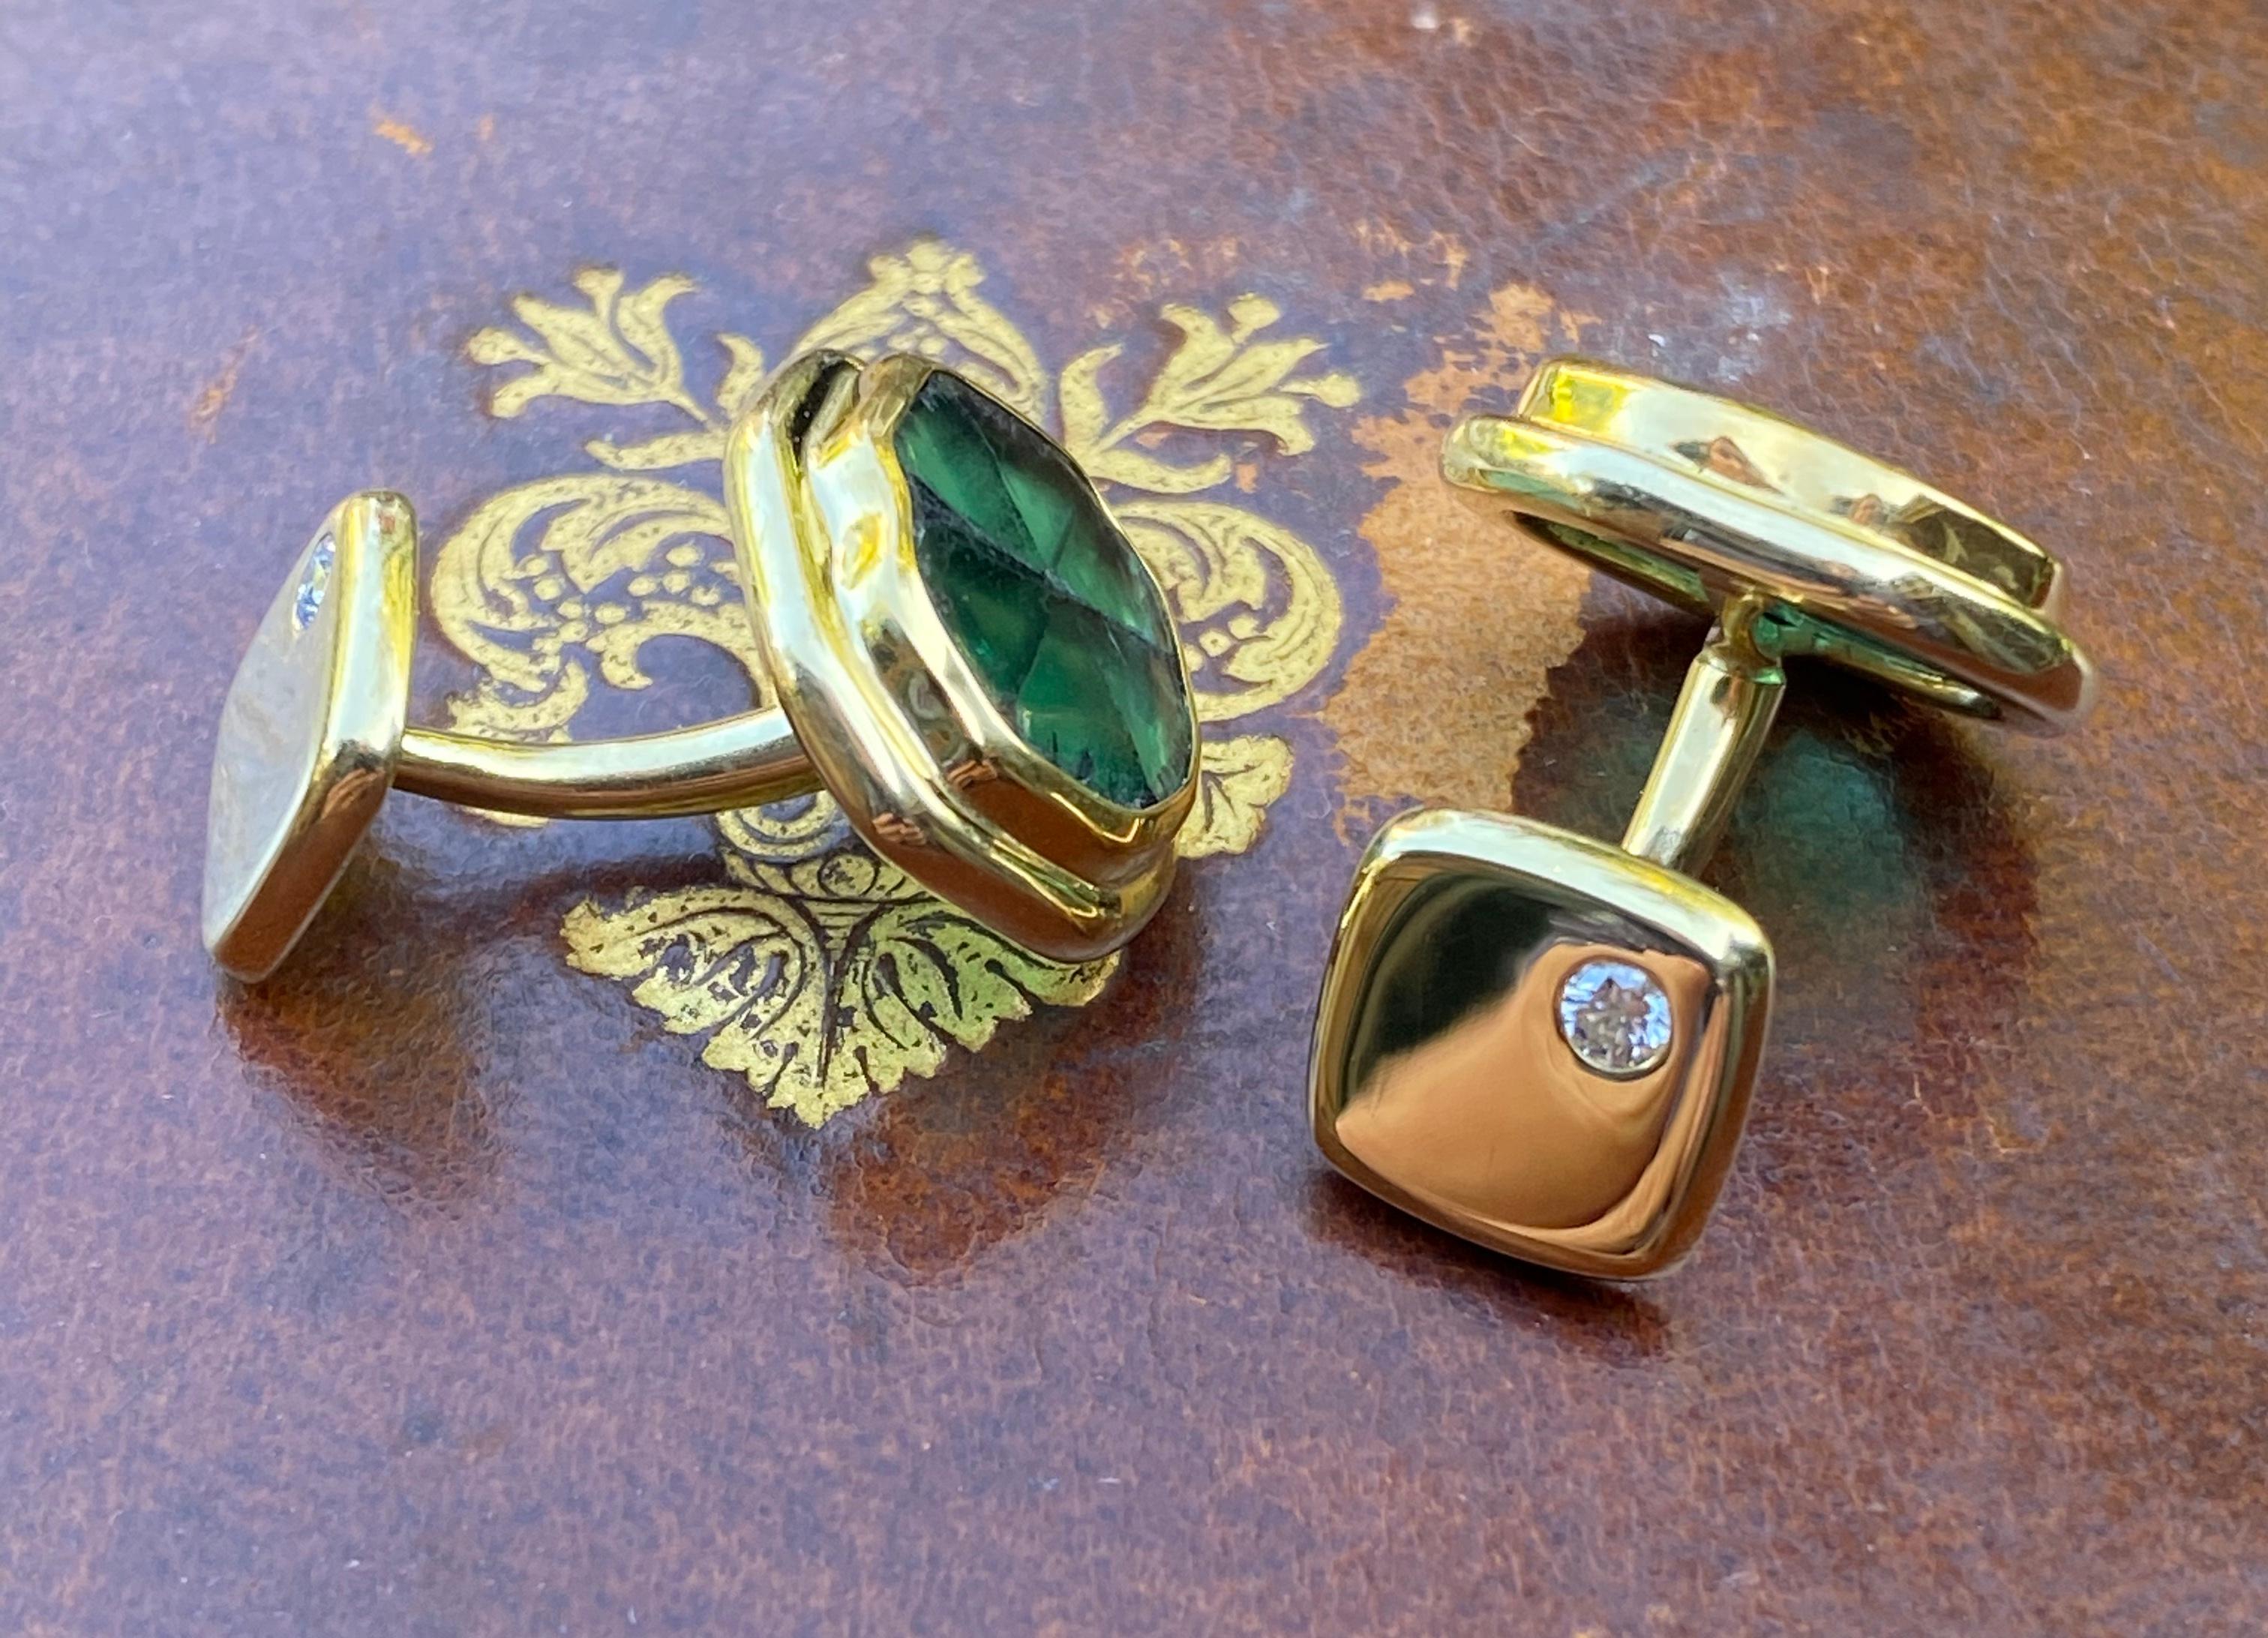 These Colombian Muzo emerald trapiche cuff links are hand forged in 22 and 18 karat gold. Trapiche are a natural Colombian emerald formation found in and near the legendary Muzo mines in Colombia. 
These are one of a kind cuff links made by hand in